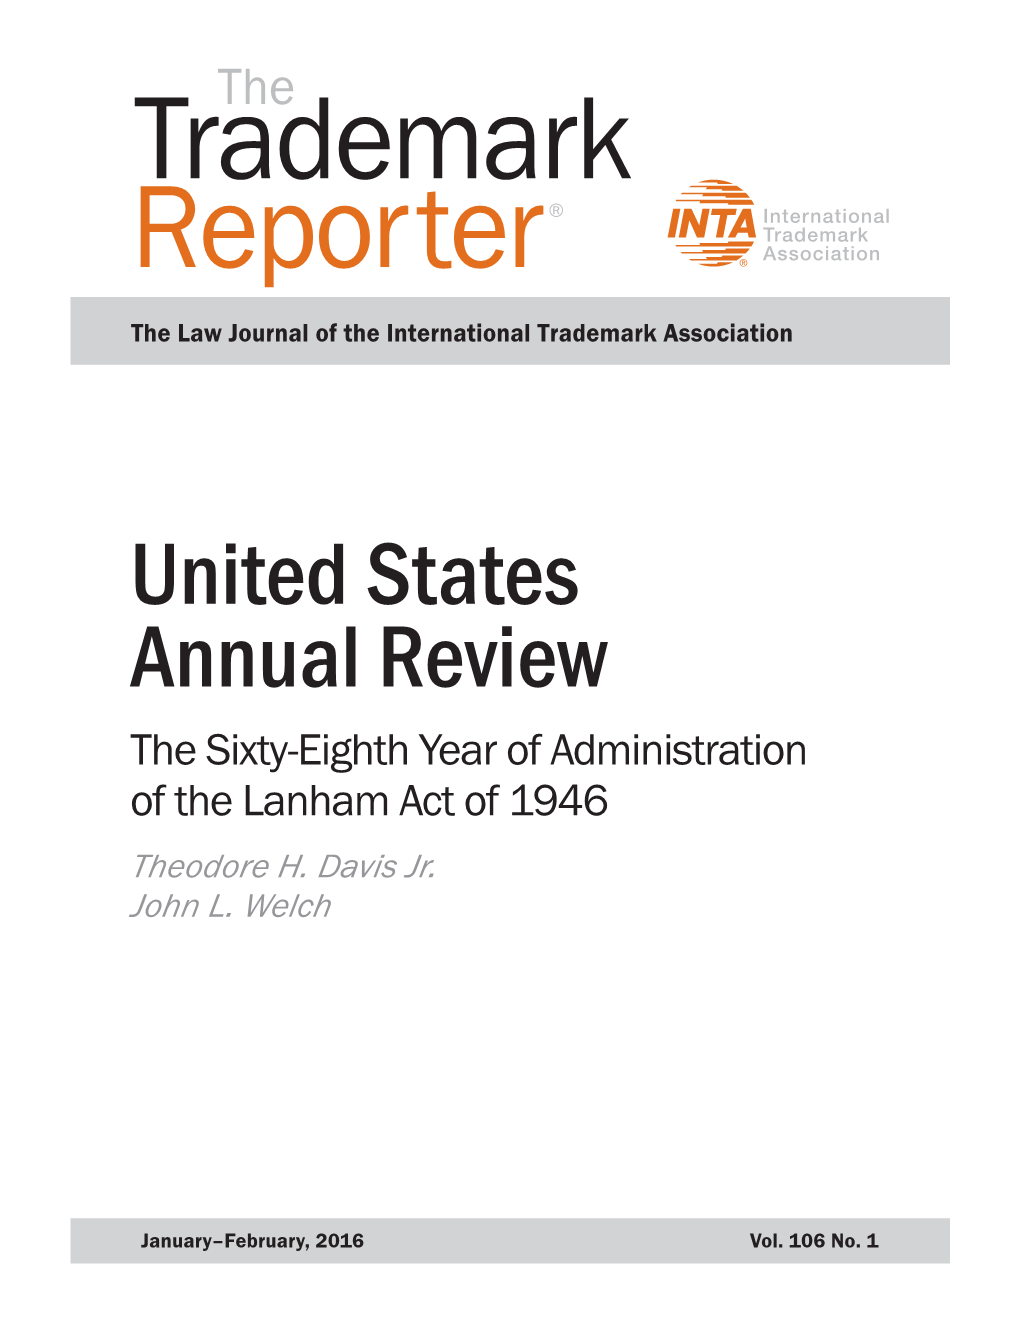 United States Annual Review the Sixty-Eighth Year of Administration of the Lanham Act of 1946 Theodore H